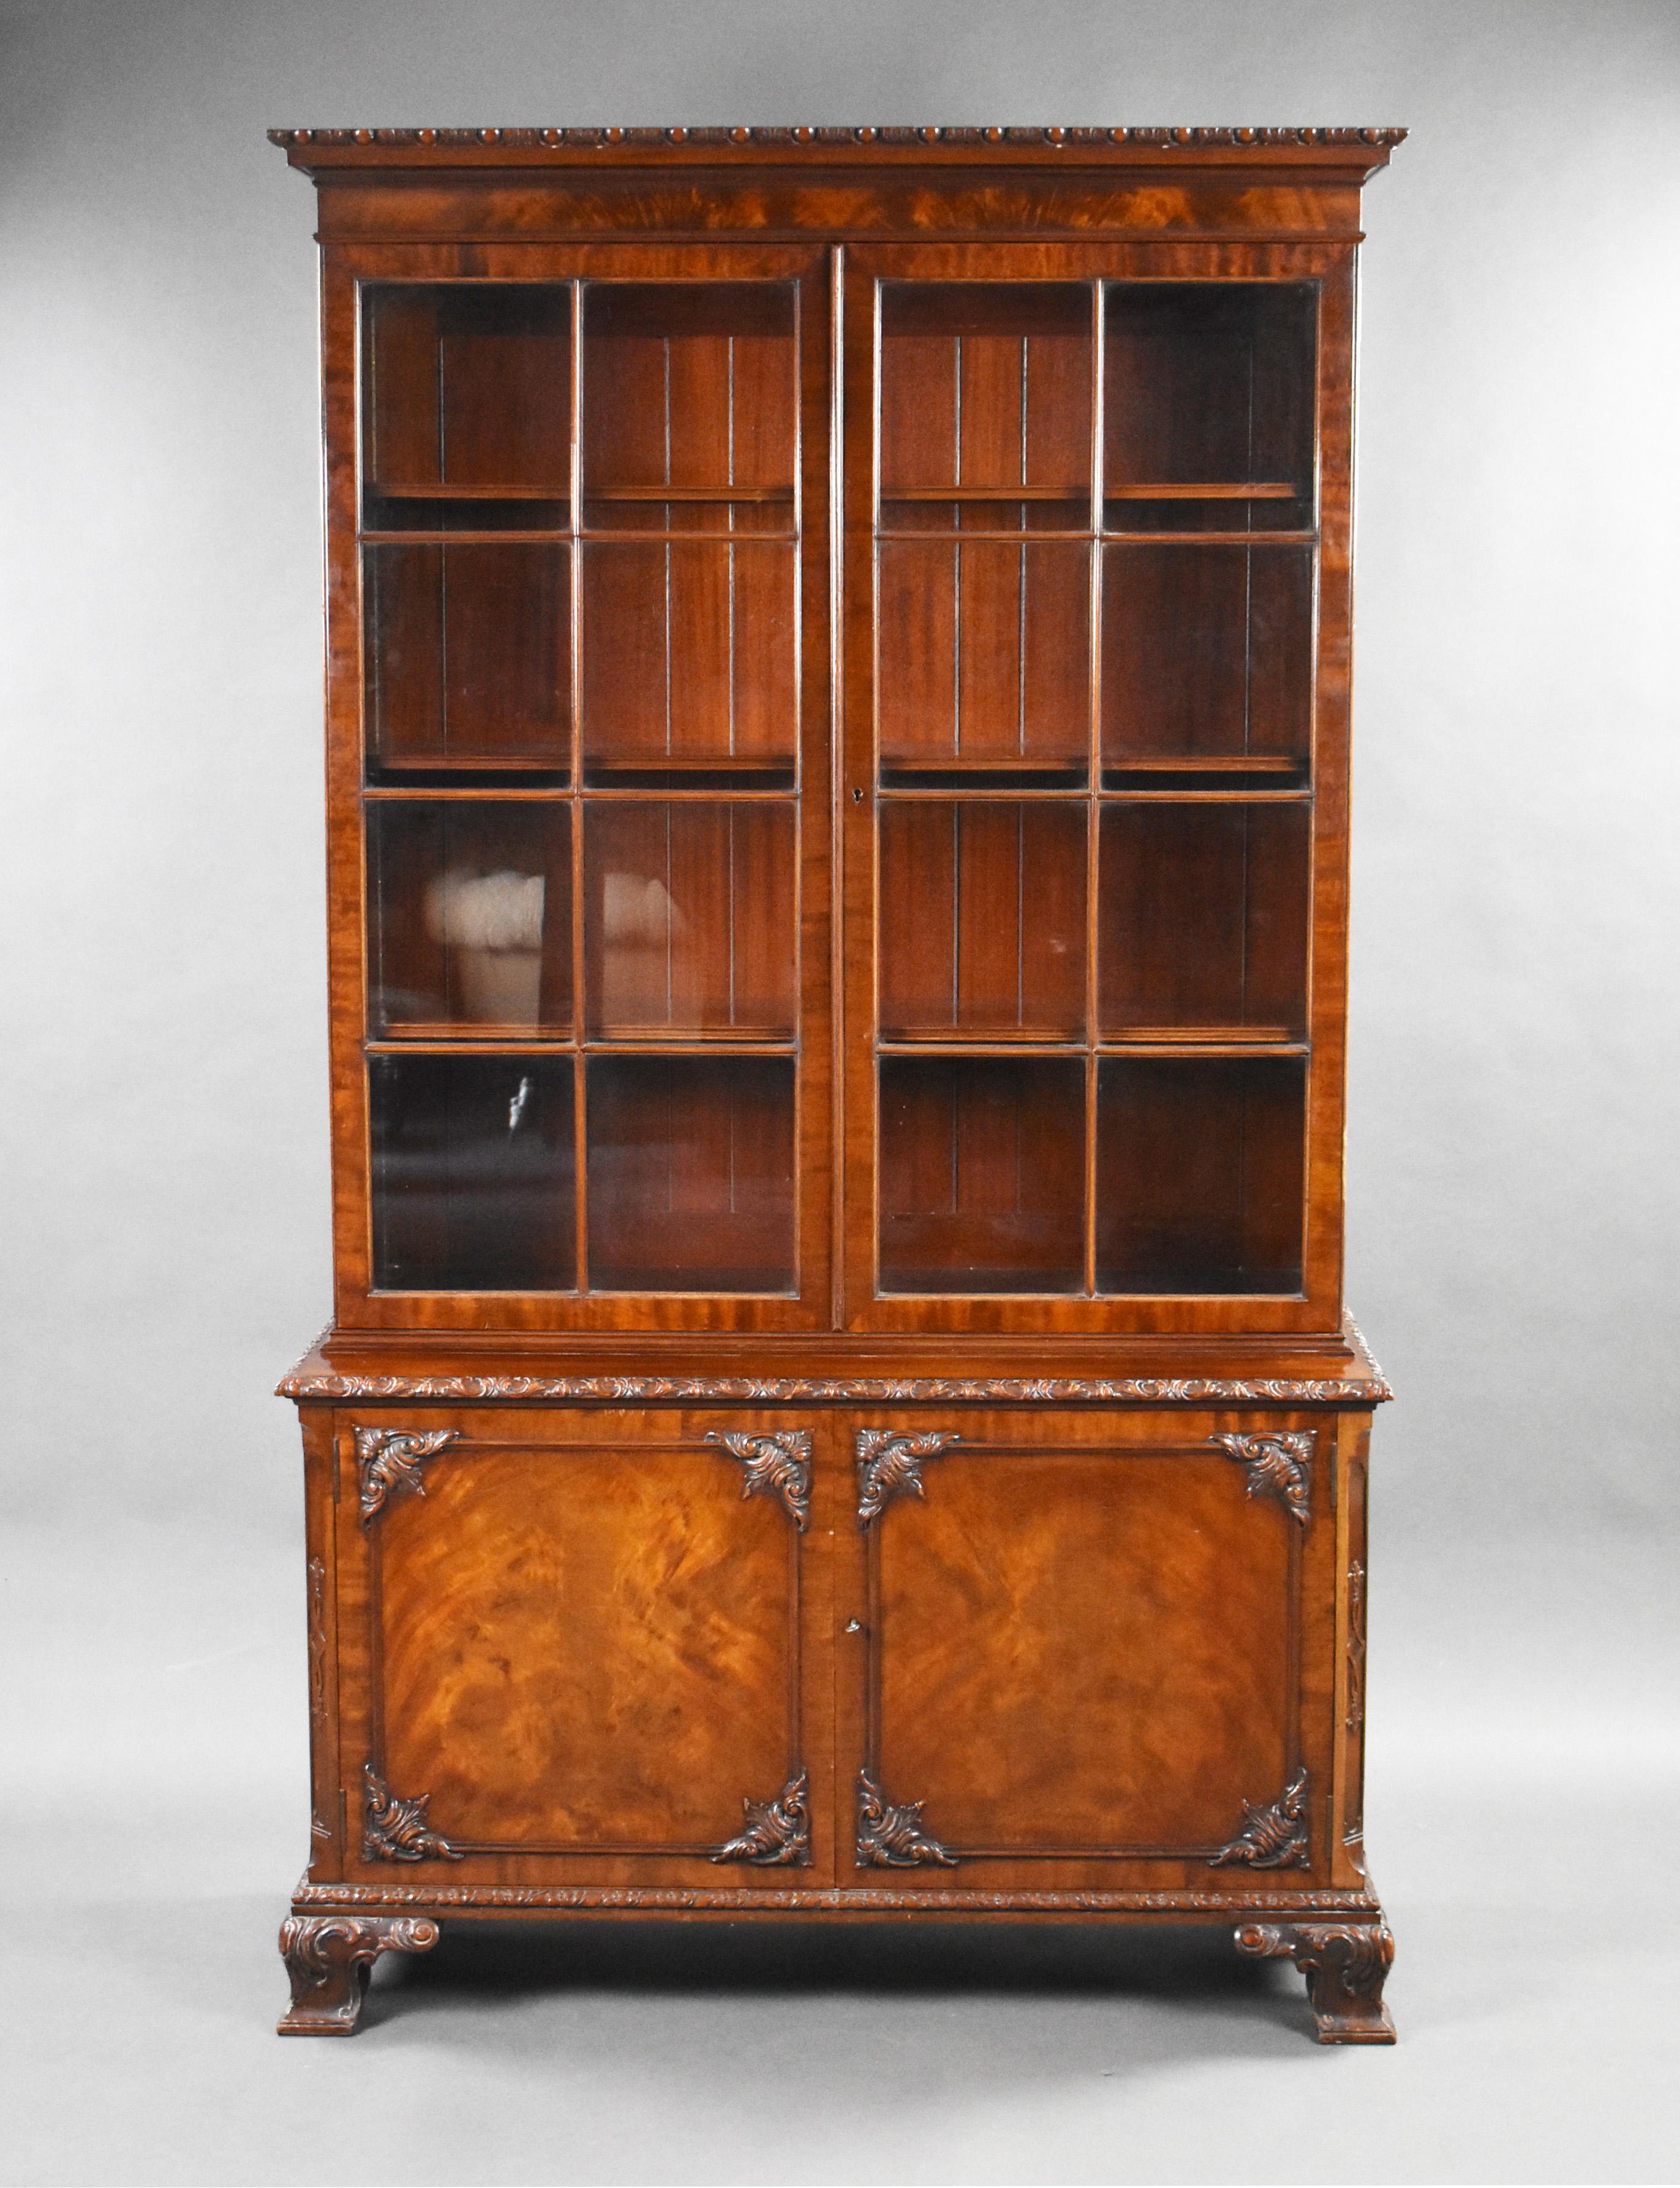 For sale is a good quality Edwardian mahogany bookcase by Waring & Gillows. The two height bookcase having two astregal glazed doors to the top, enclosing adjustable shelves. Having two paneled doors below, standing on carved ogee bracket feet. The